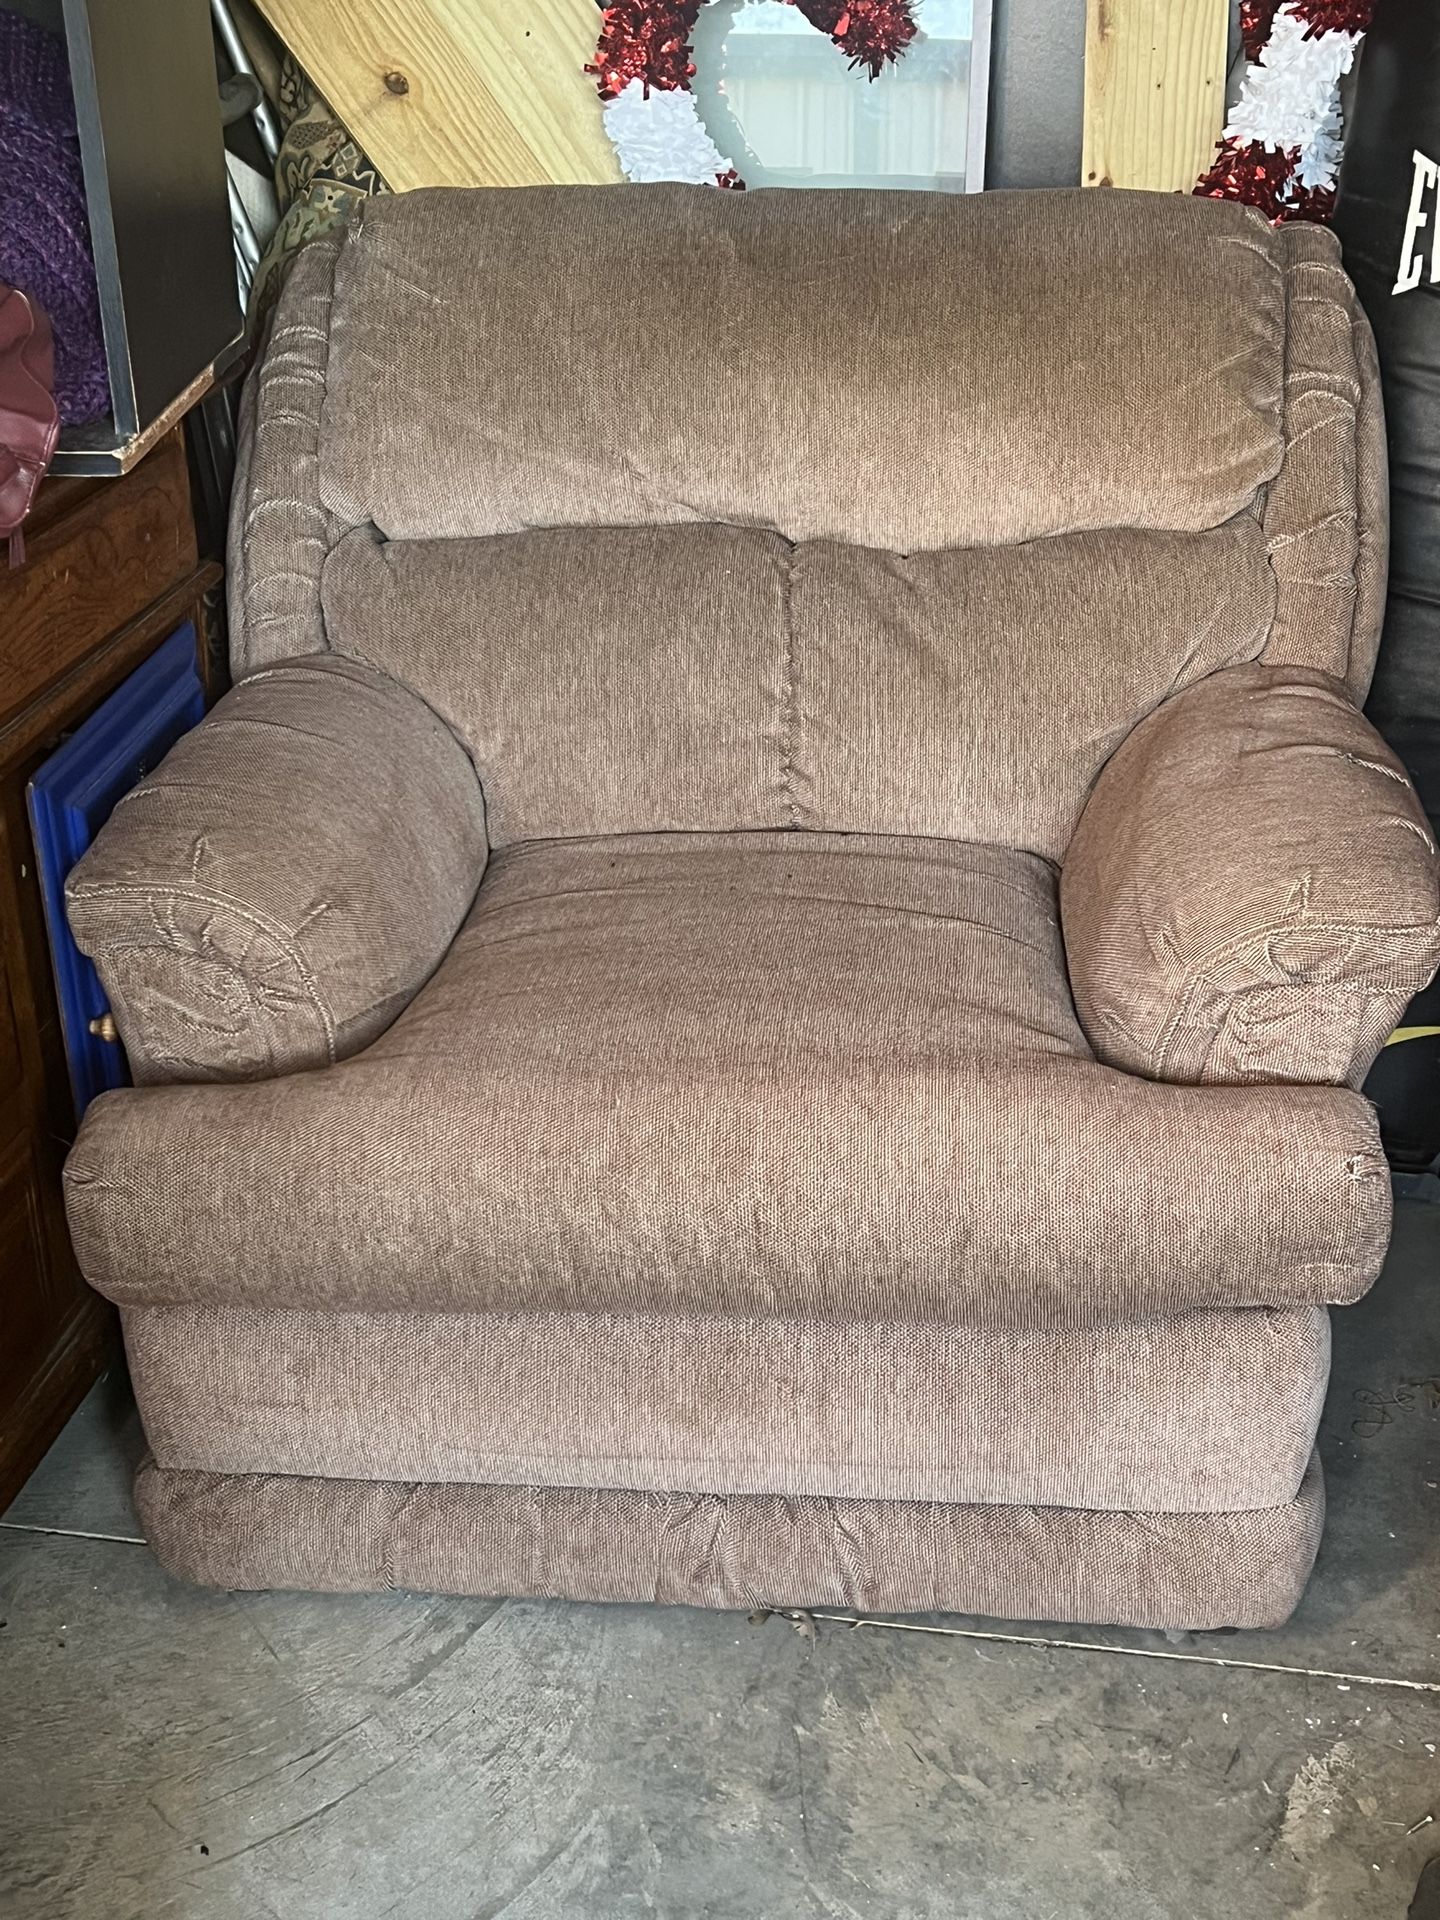 Large Comfy Chair, Not A Recliner